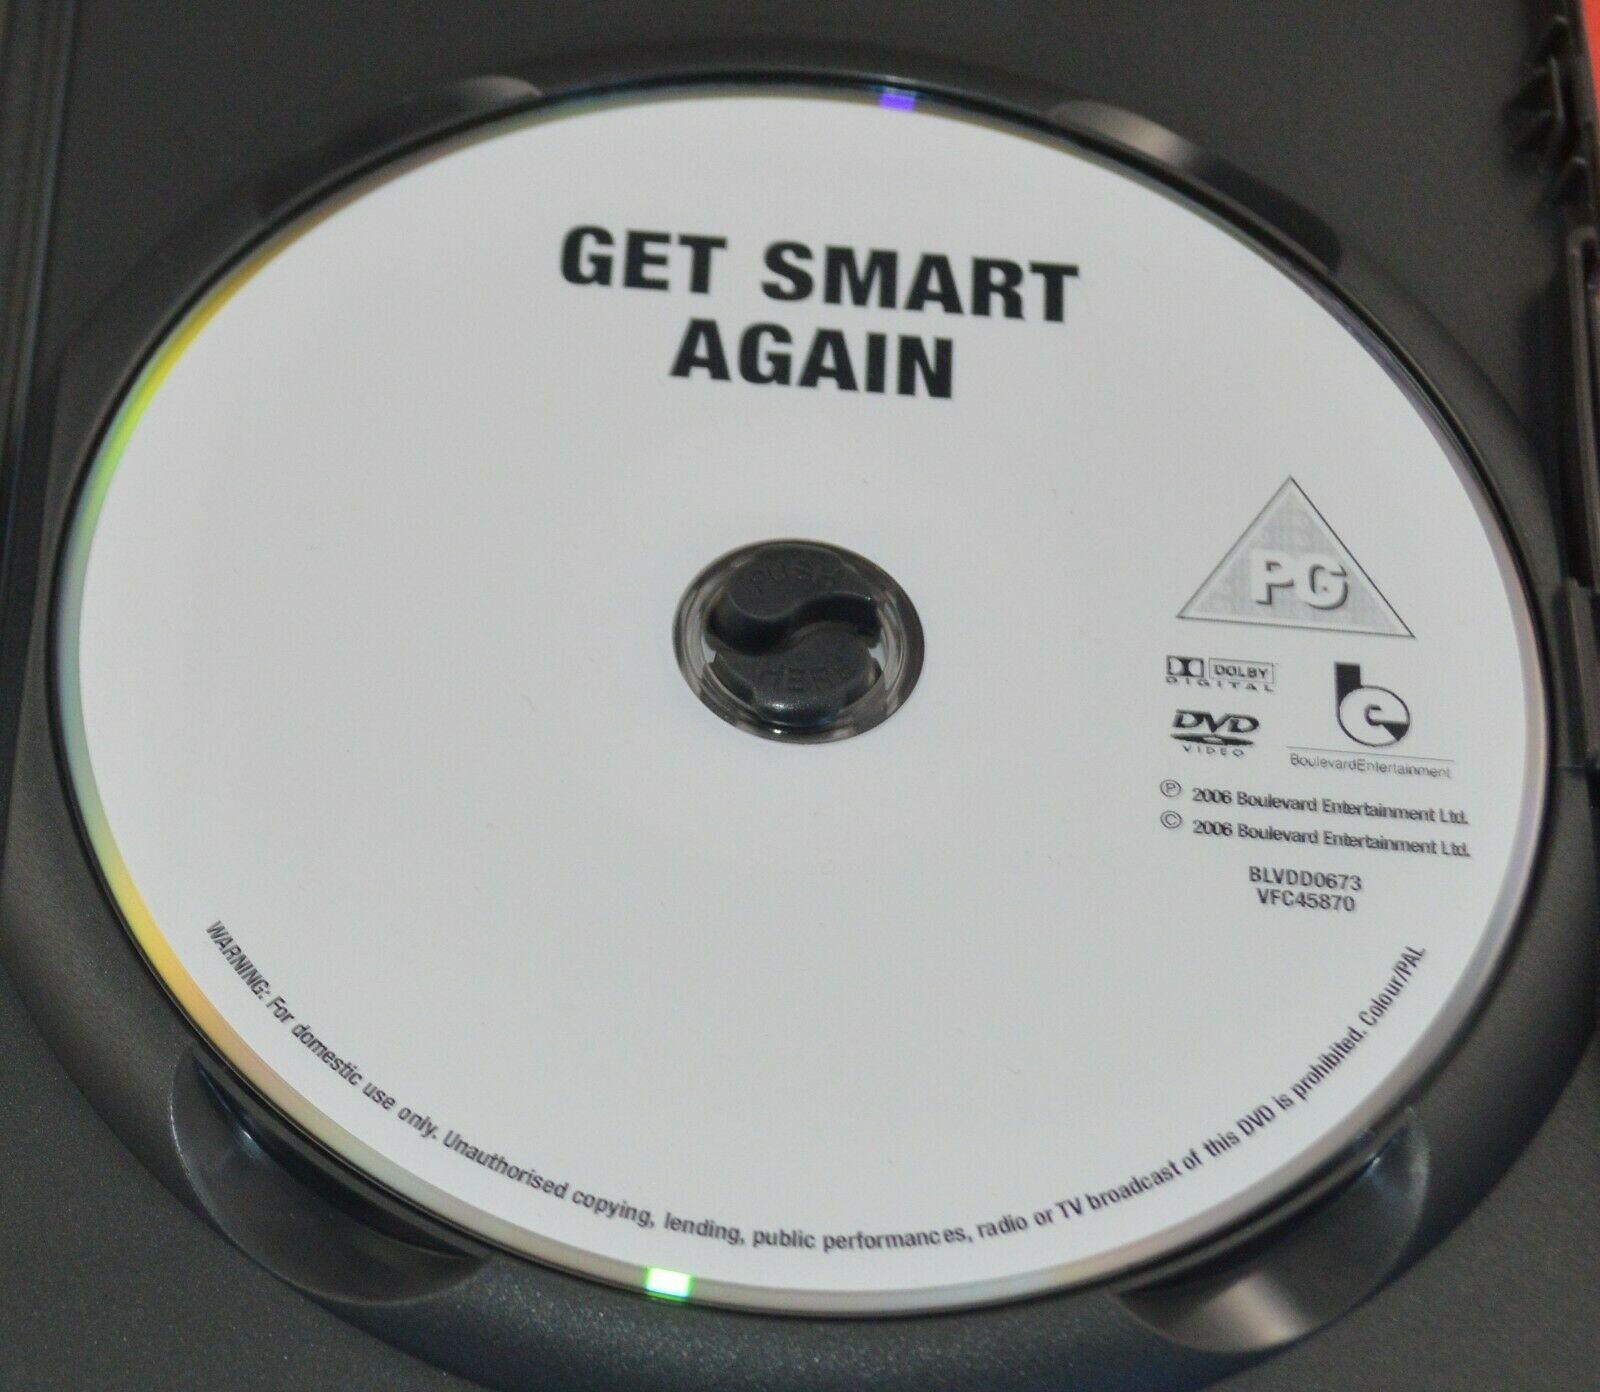 DVD GET SMART AGAIN (PREVIOUSLY OWNED) GOOD CONDITION - TMD167207